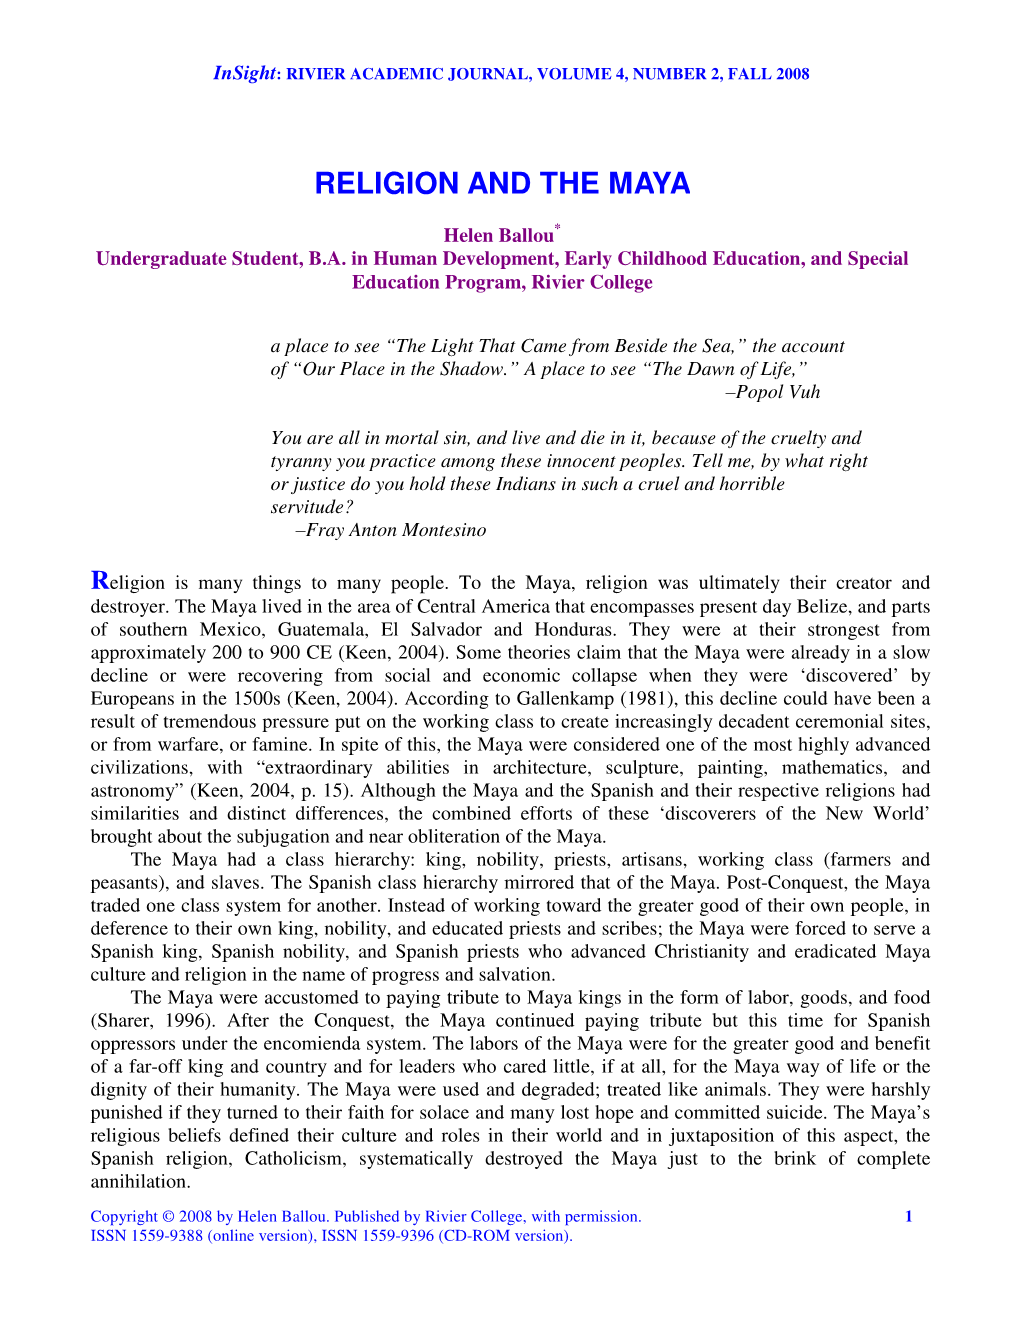 Religion and the Maya